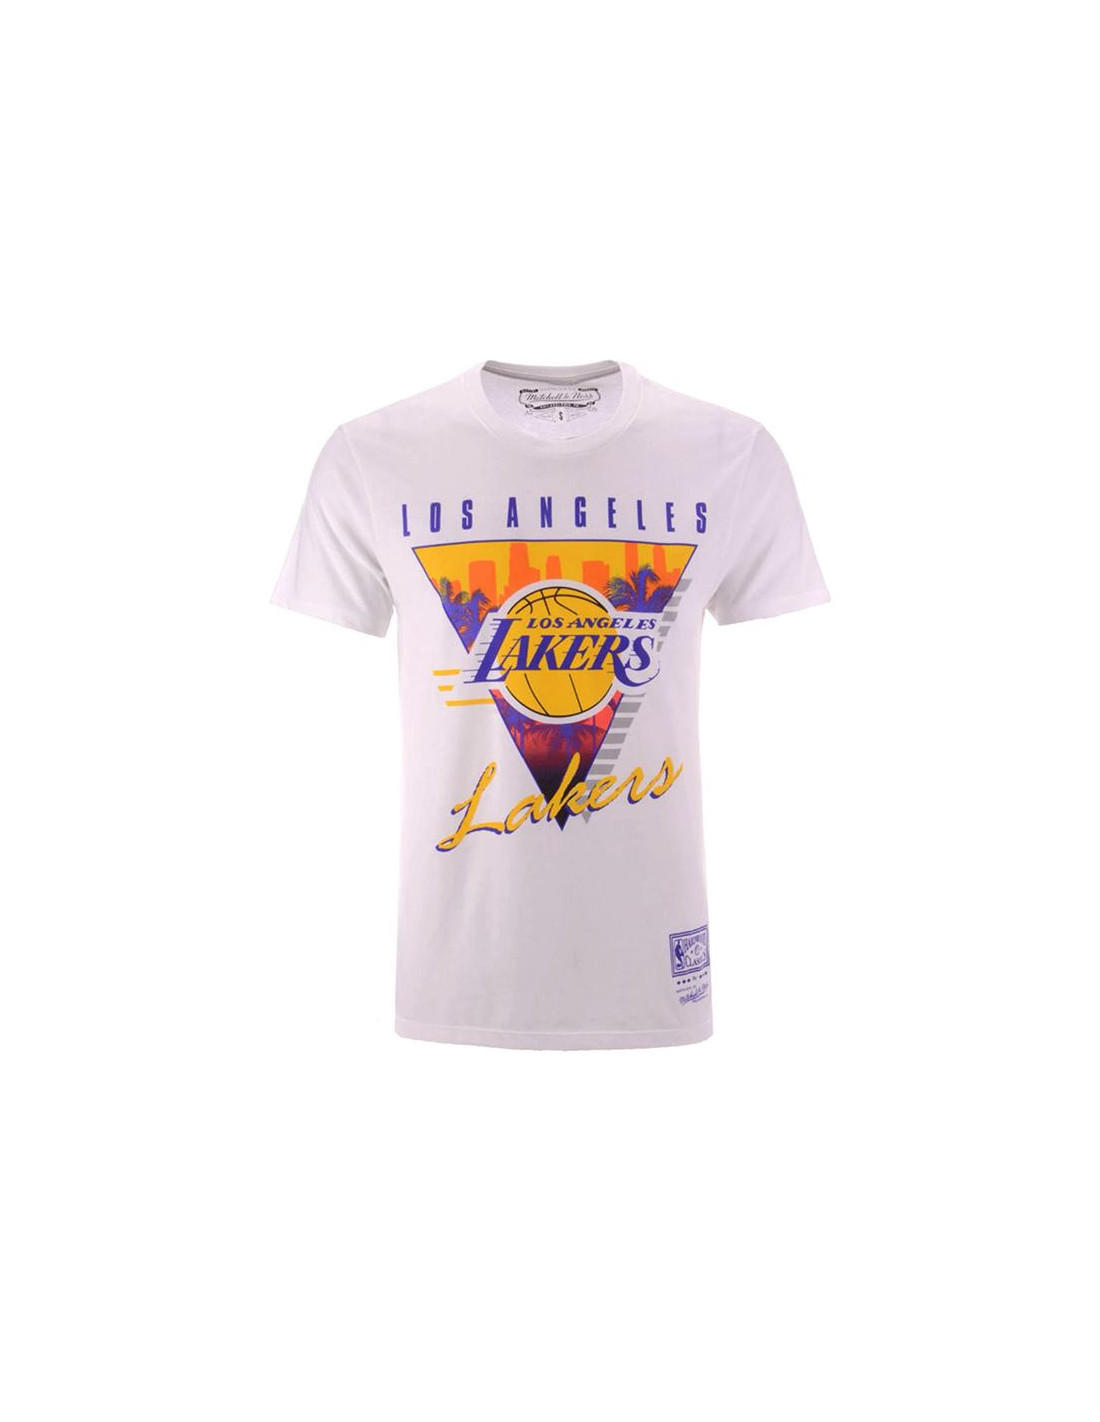 Camiseta mitchell & ness los angeles lakers hombre wh